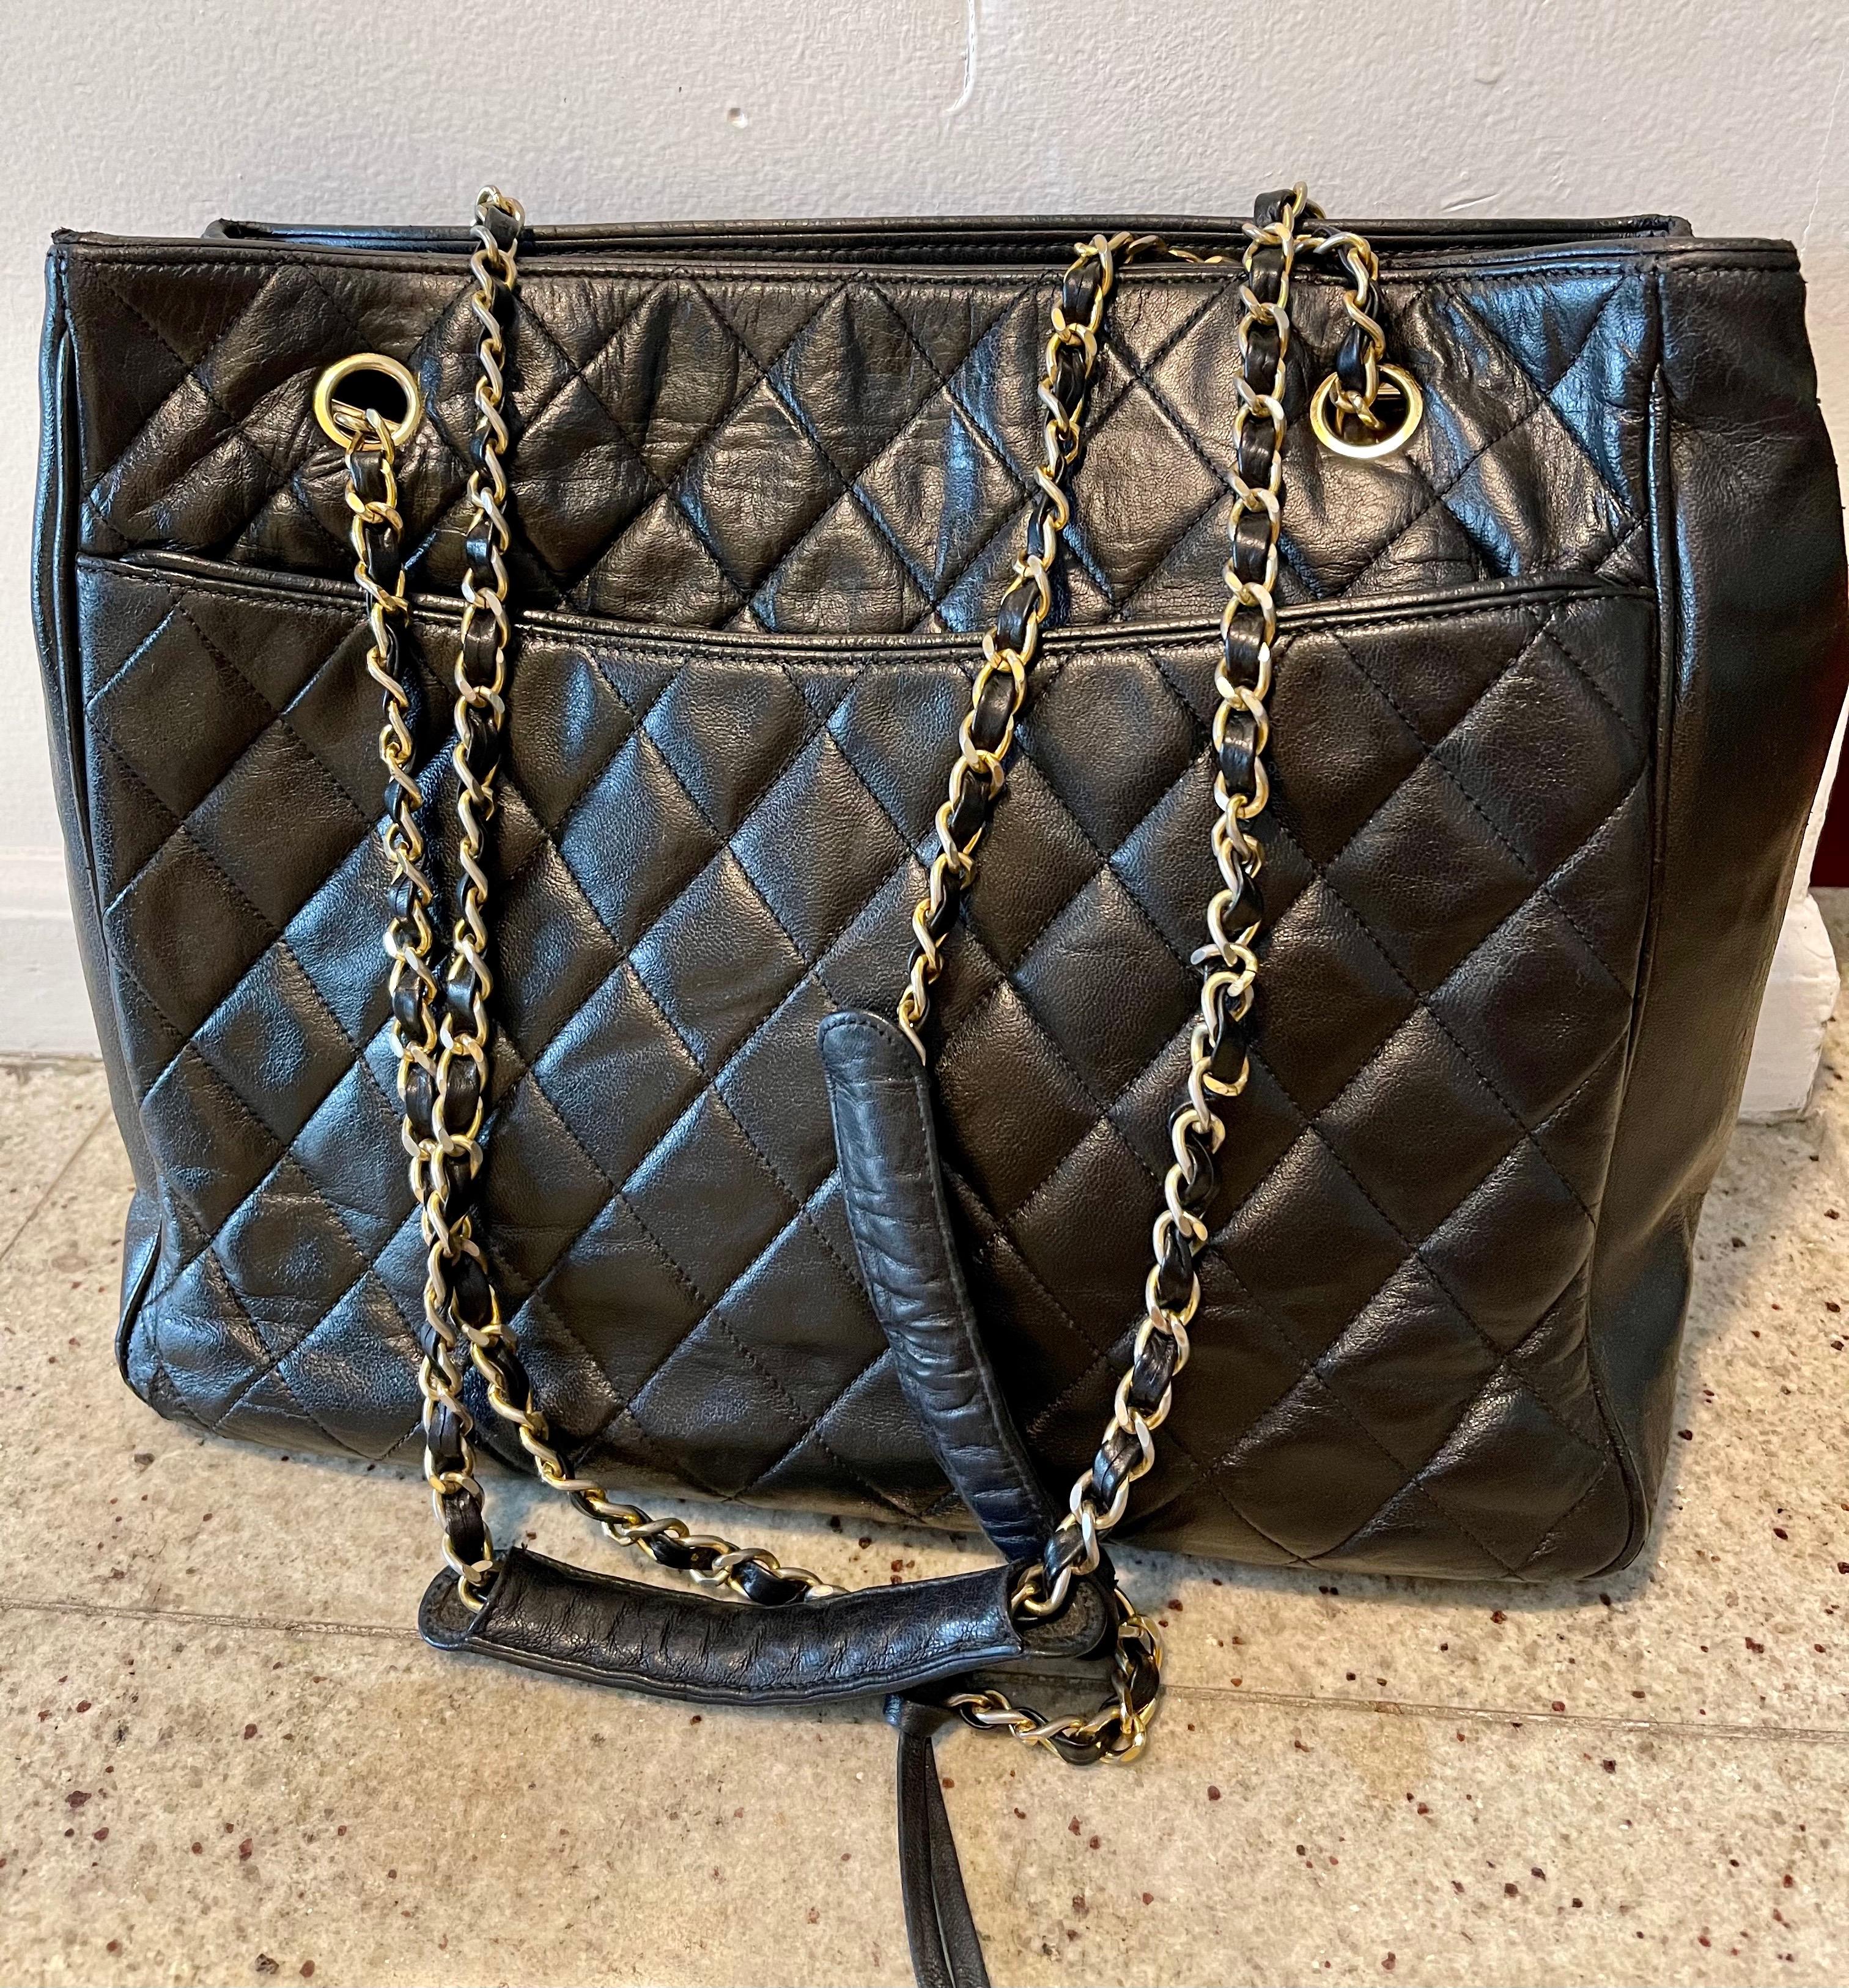 Chanel Quilted Black Caviar Skin Grand Shopper Chain Tote, Golden Hardware
Chanel’s Grand Shopping Tote comes in durable black caviar leather and features Golden hardware,
This stylish tote is crafted of diamond quilted caviar leather in black. This